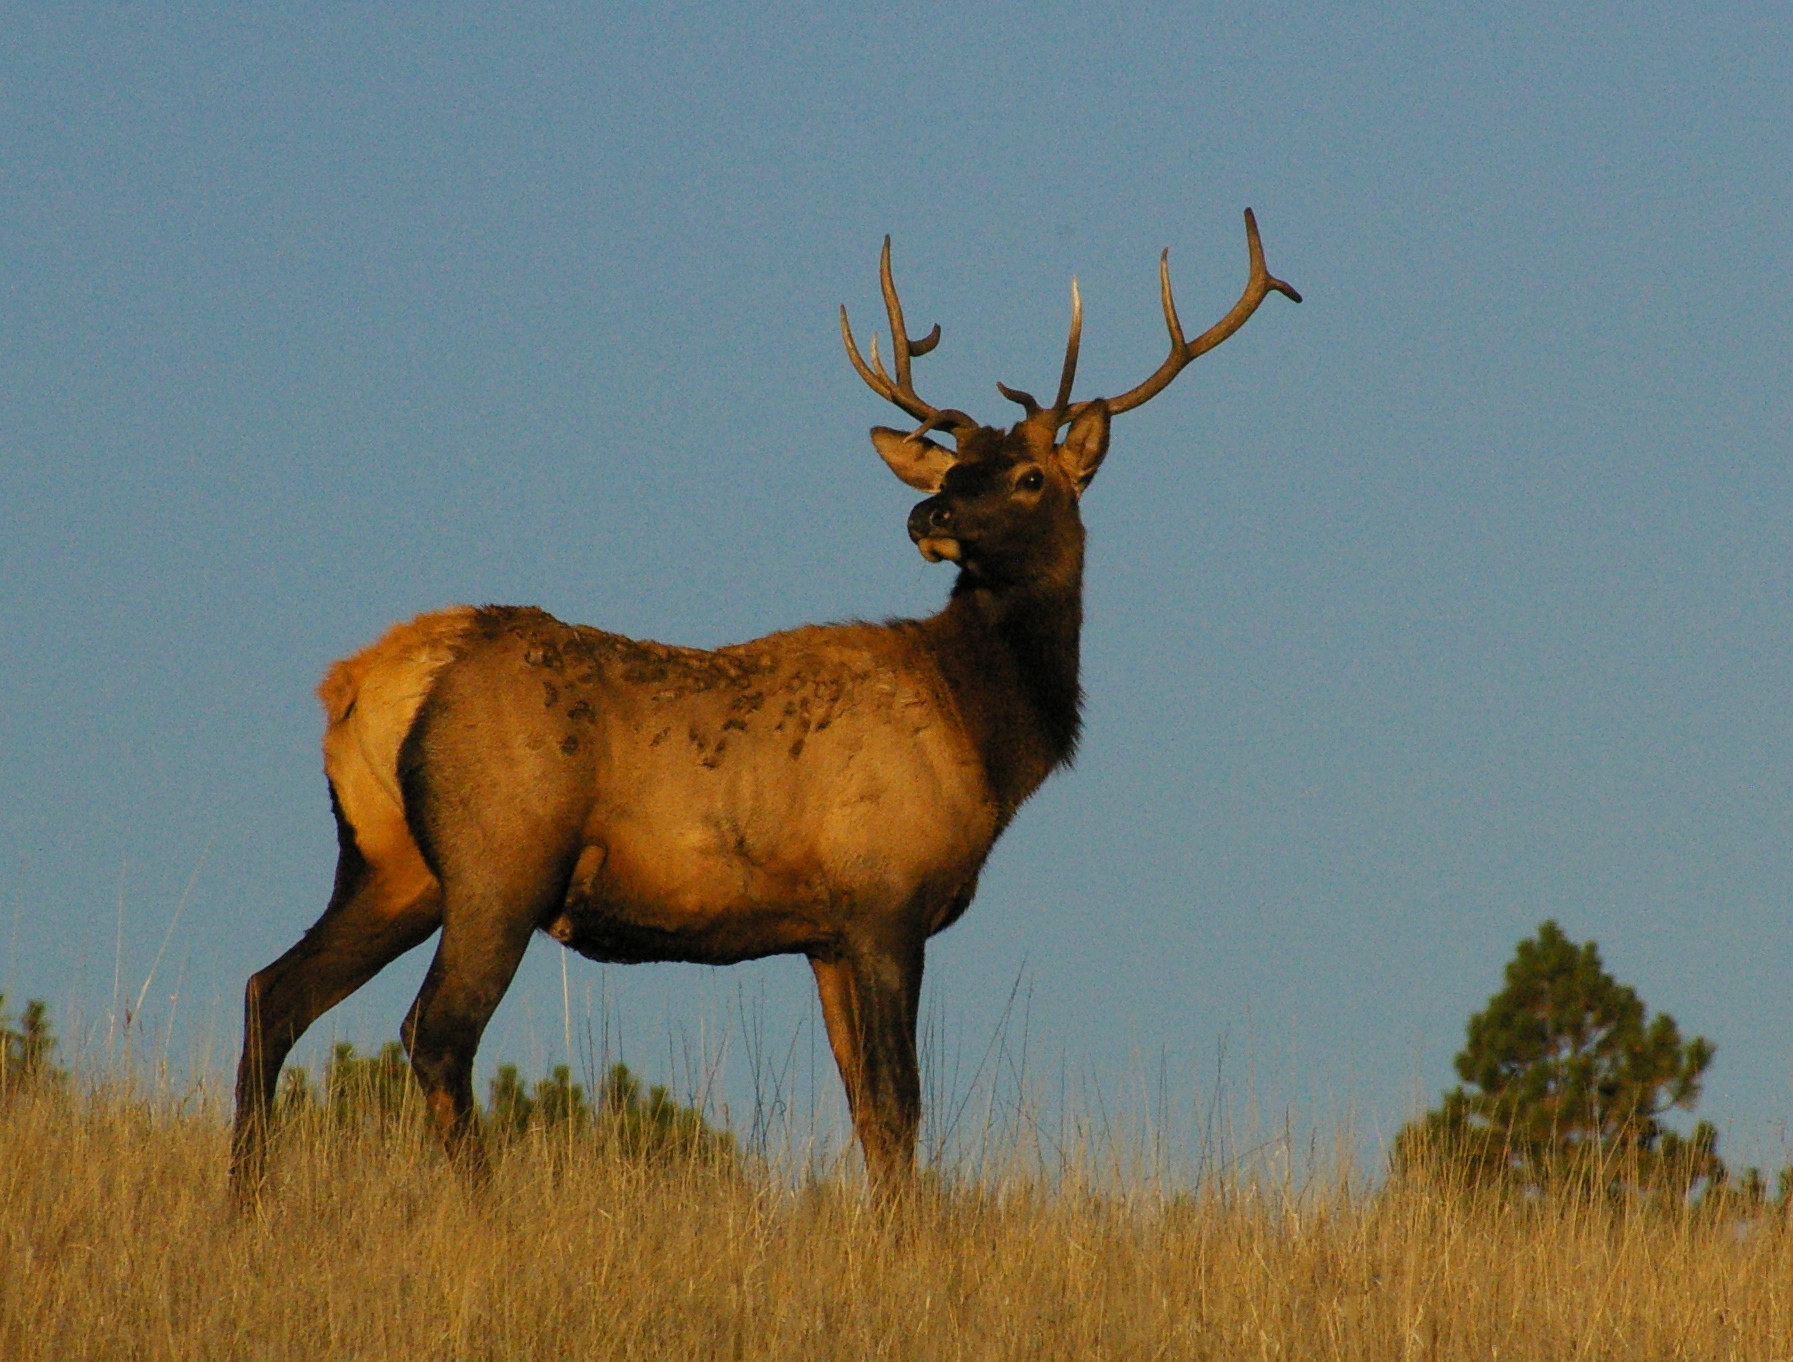 A bull elk with large antlers standing in a grassy meadow